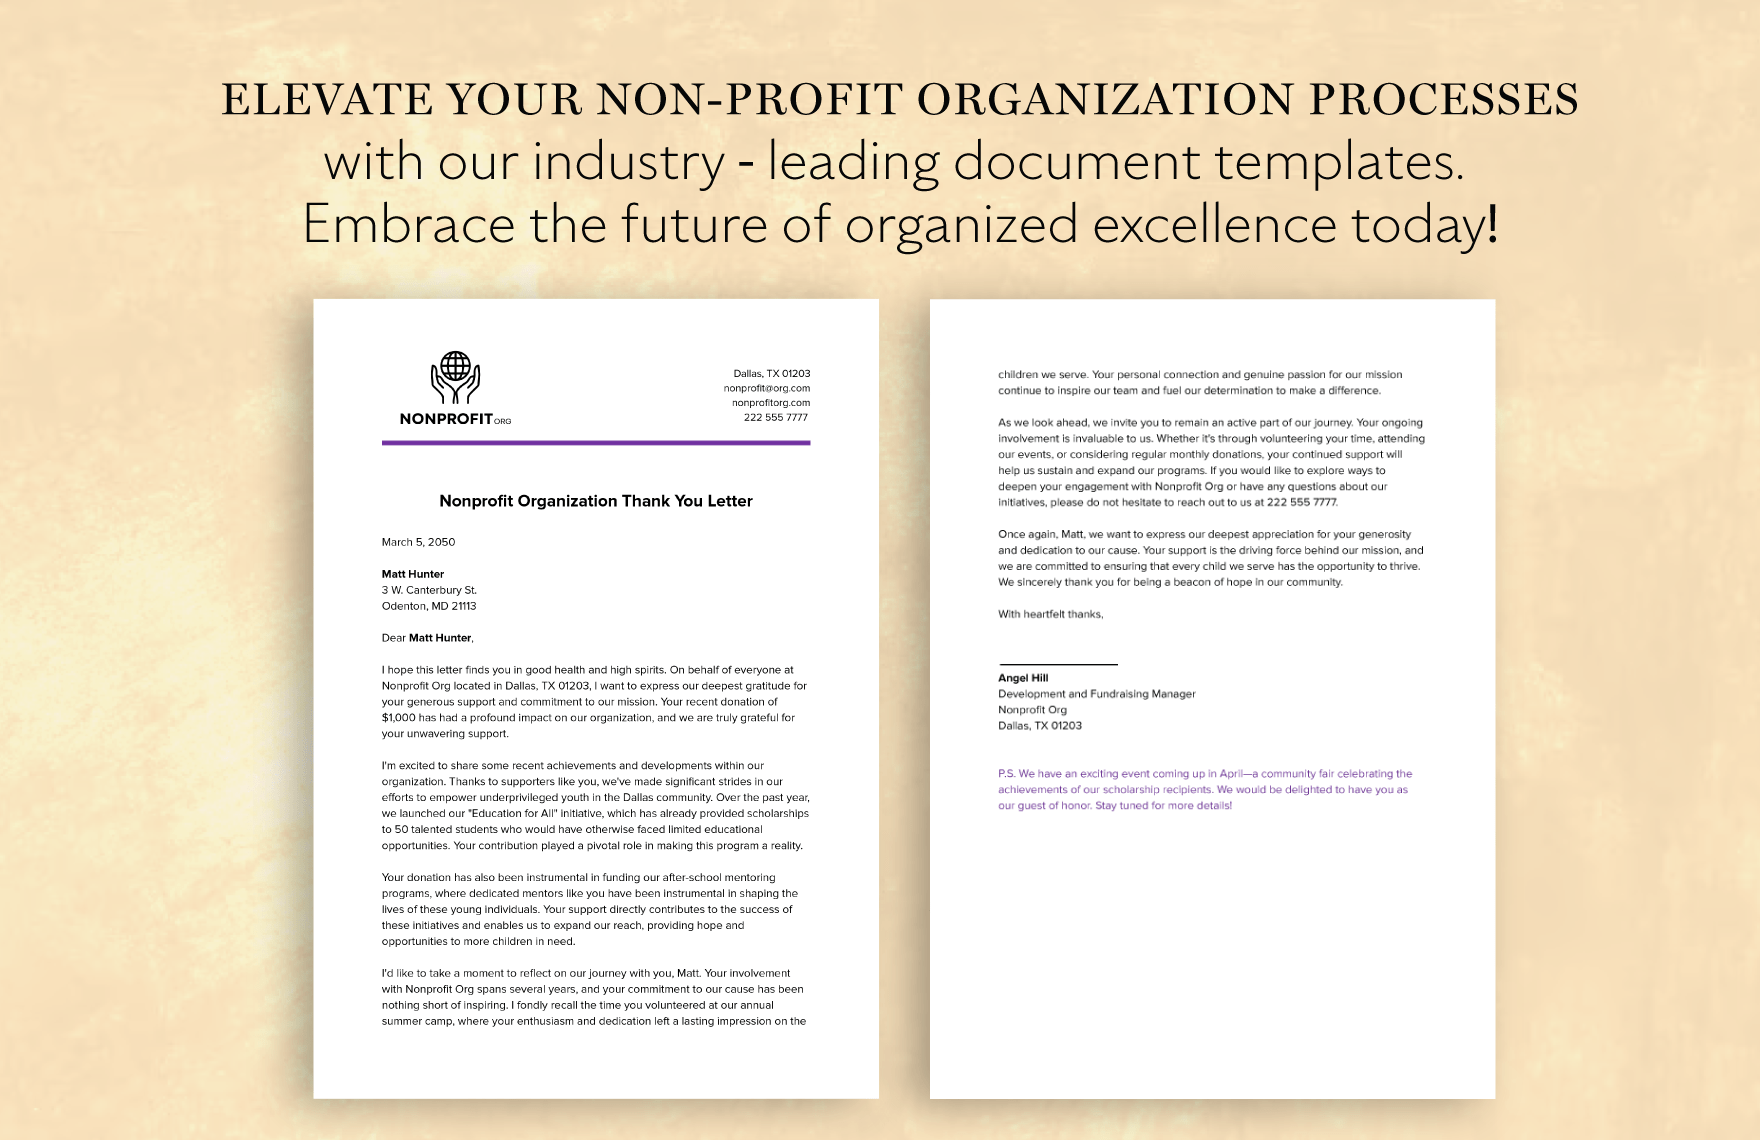 Nonprofit Organization Thank You Letter Template